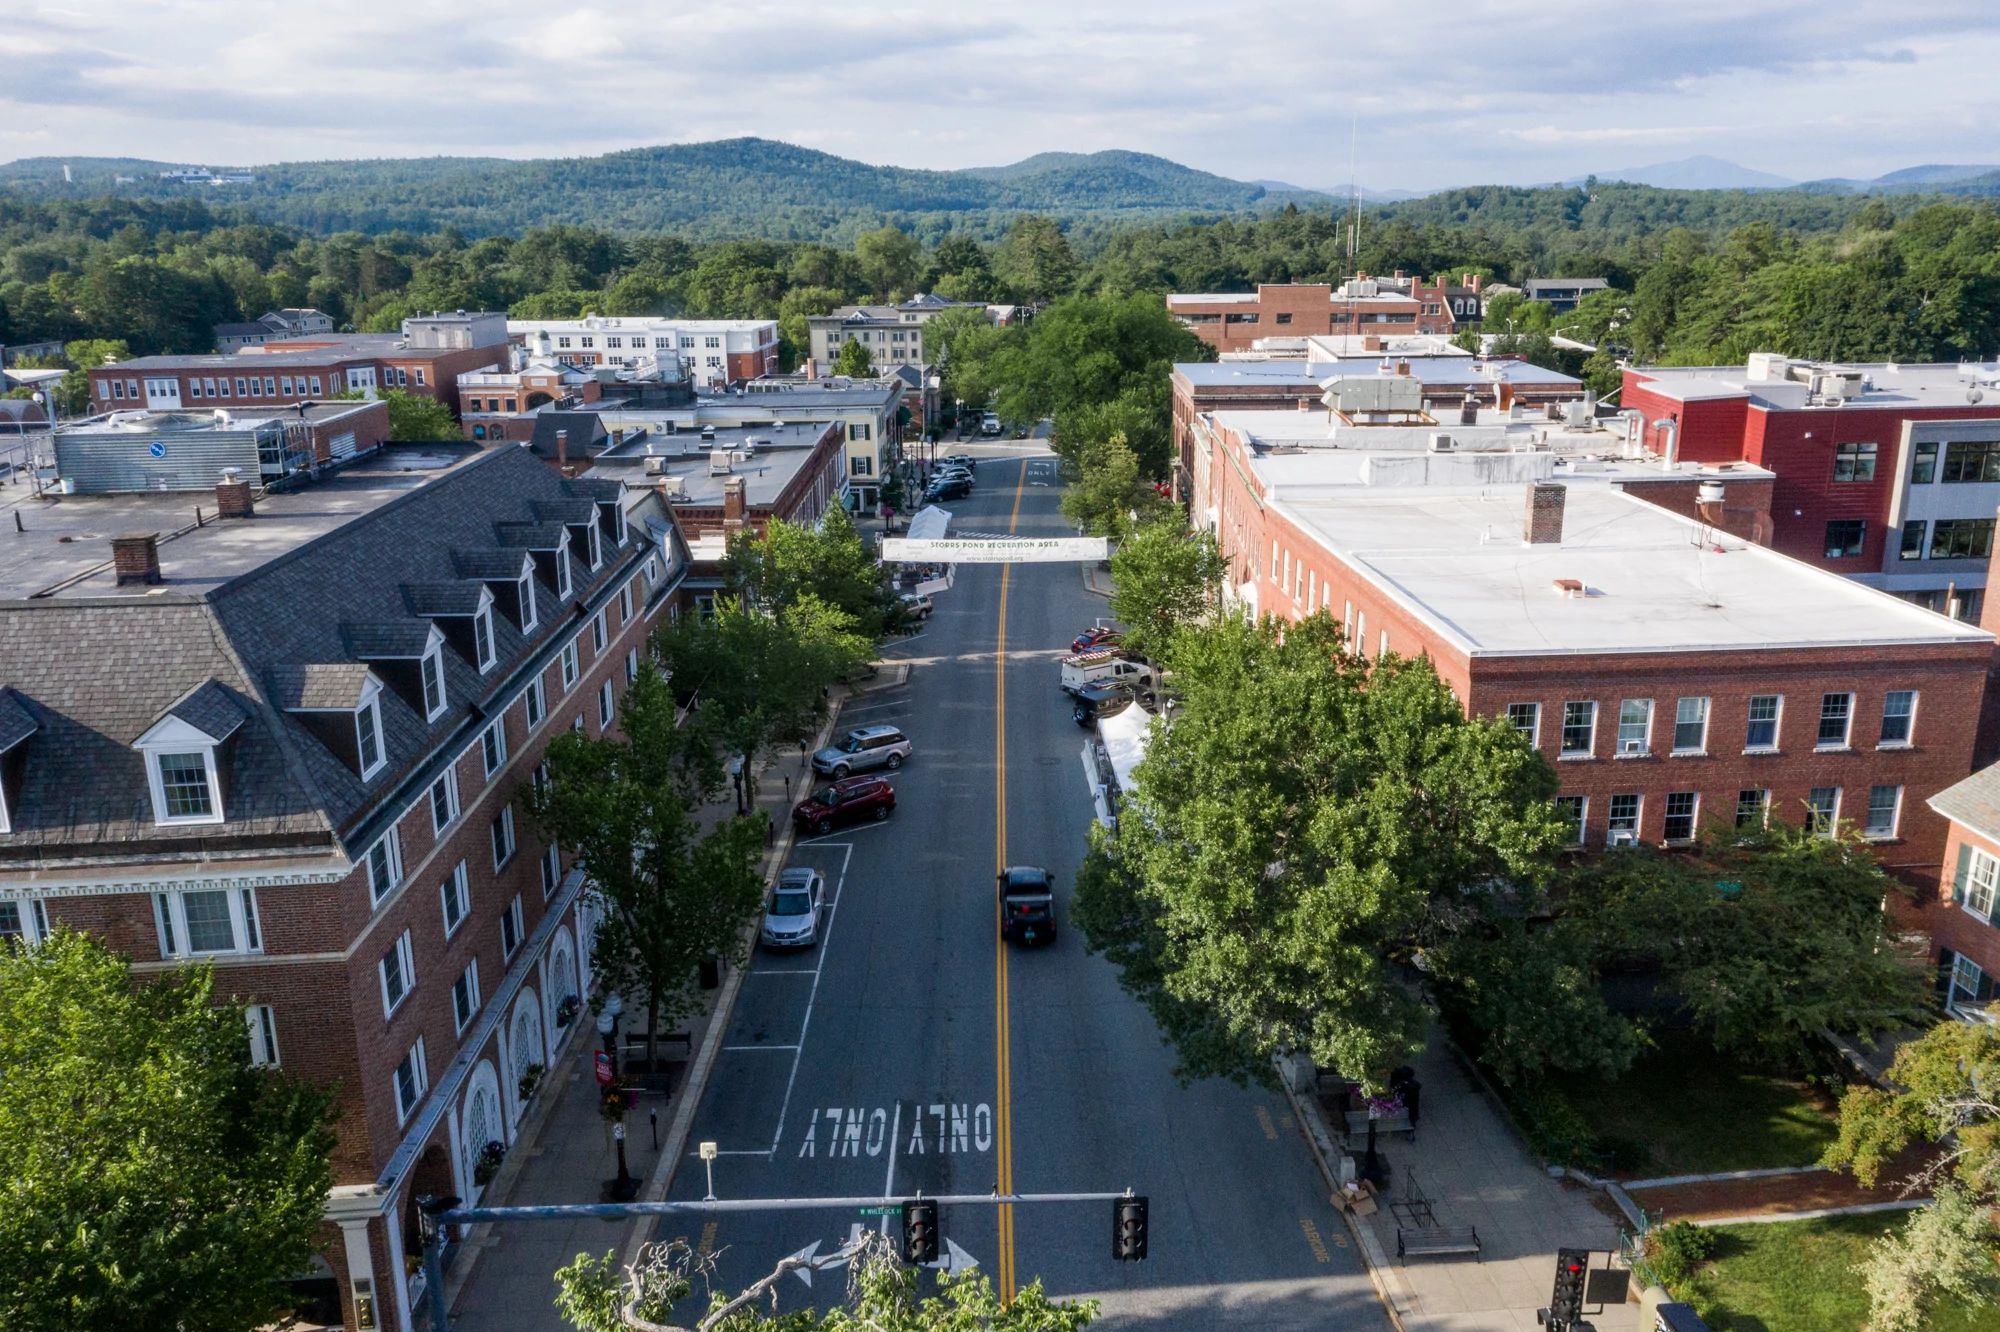 Drone image of Main Street in Hanover